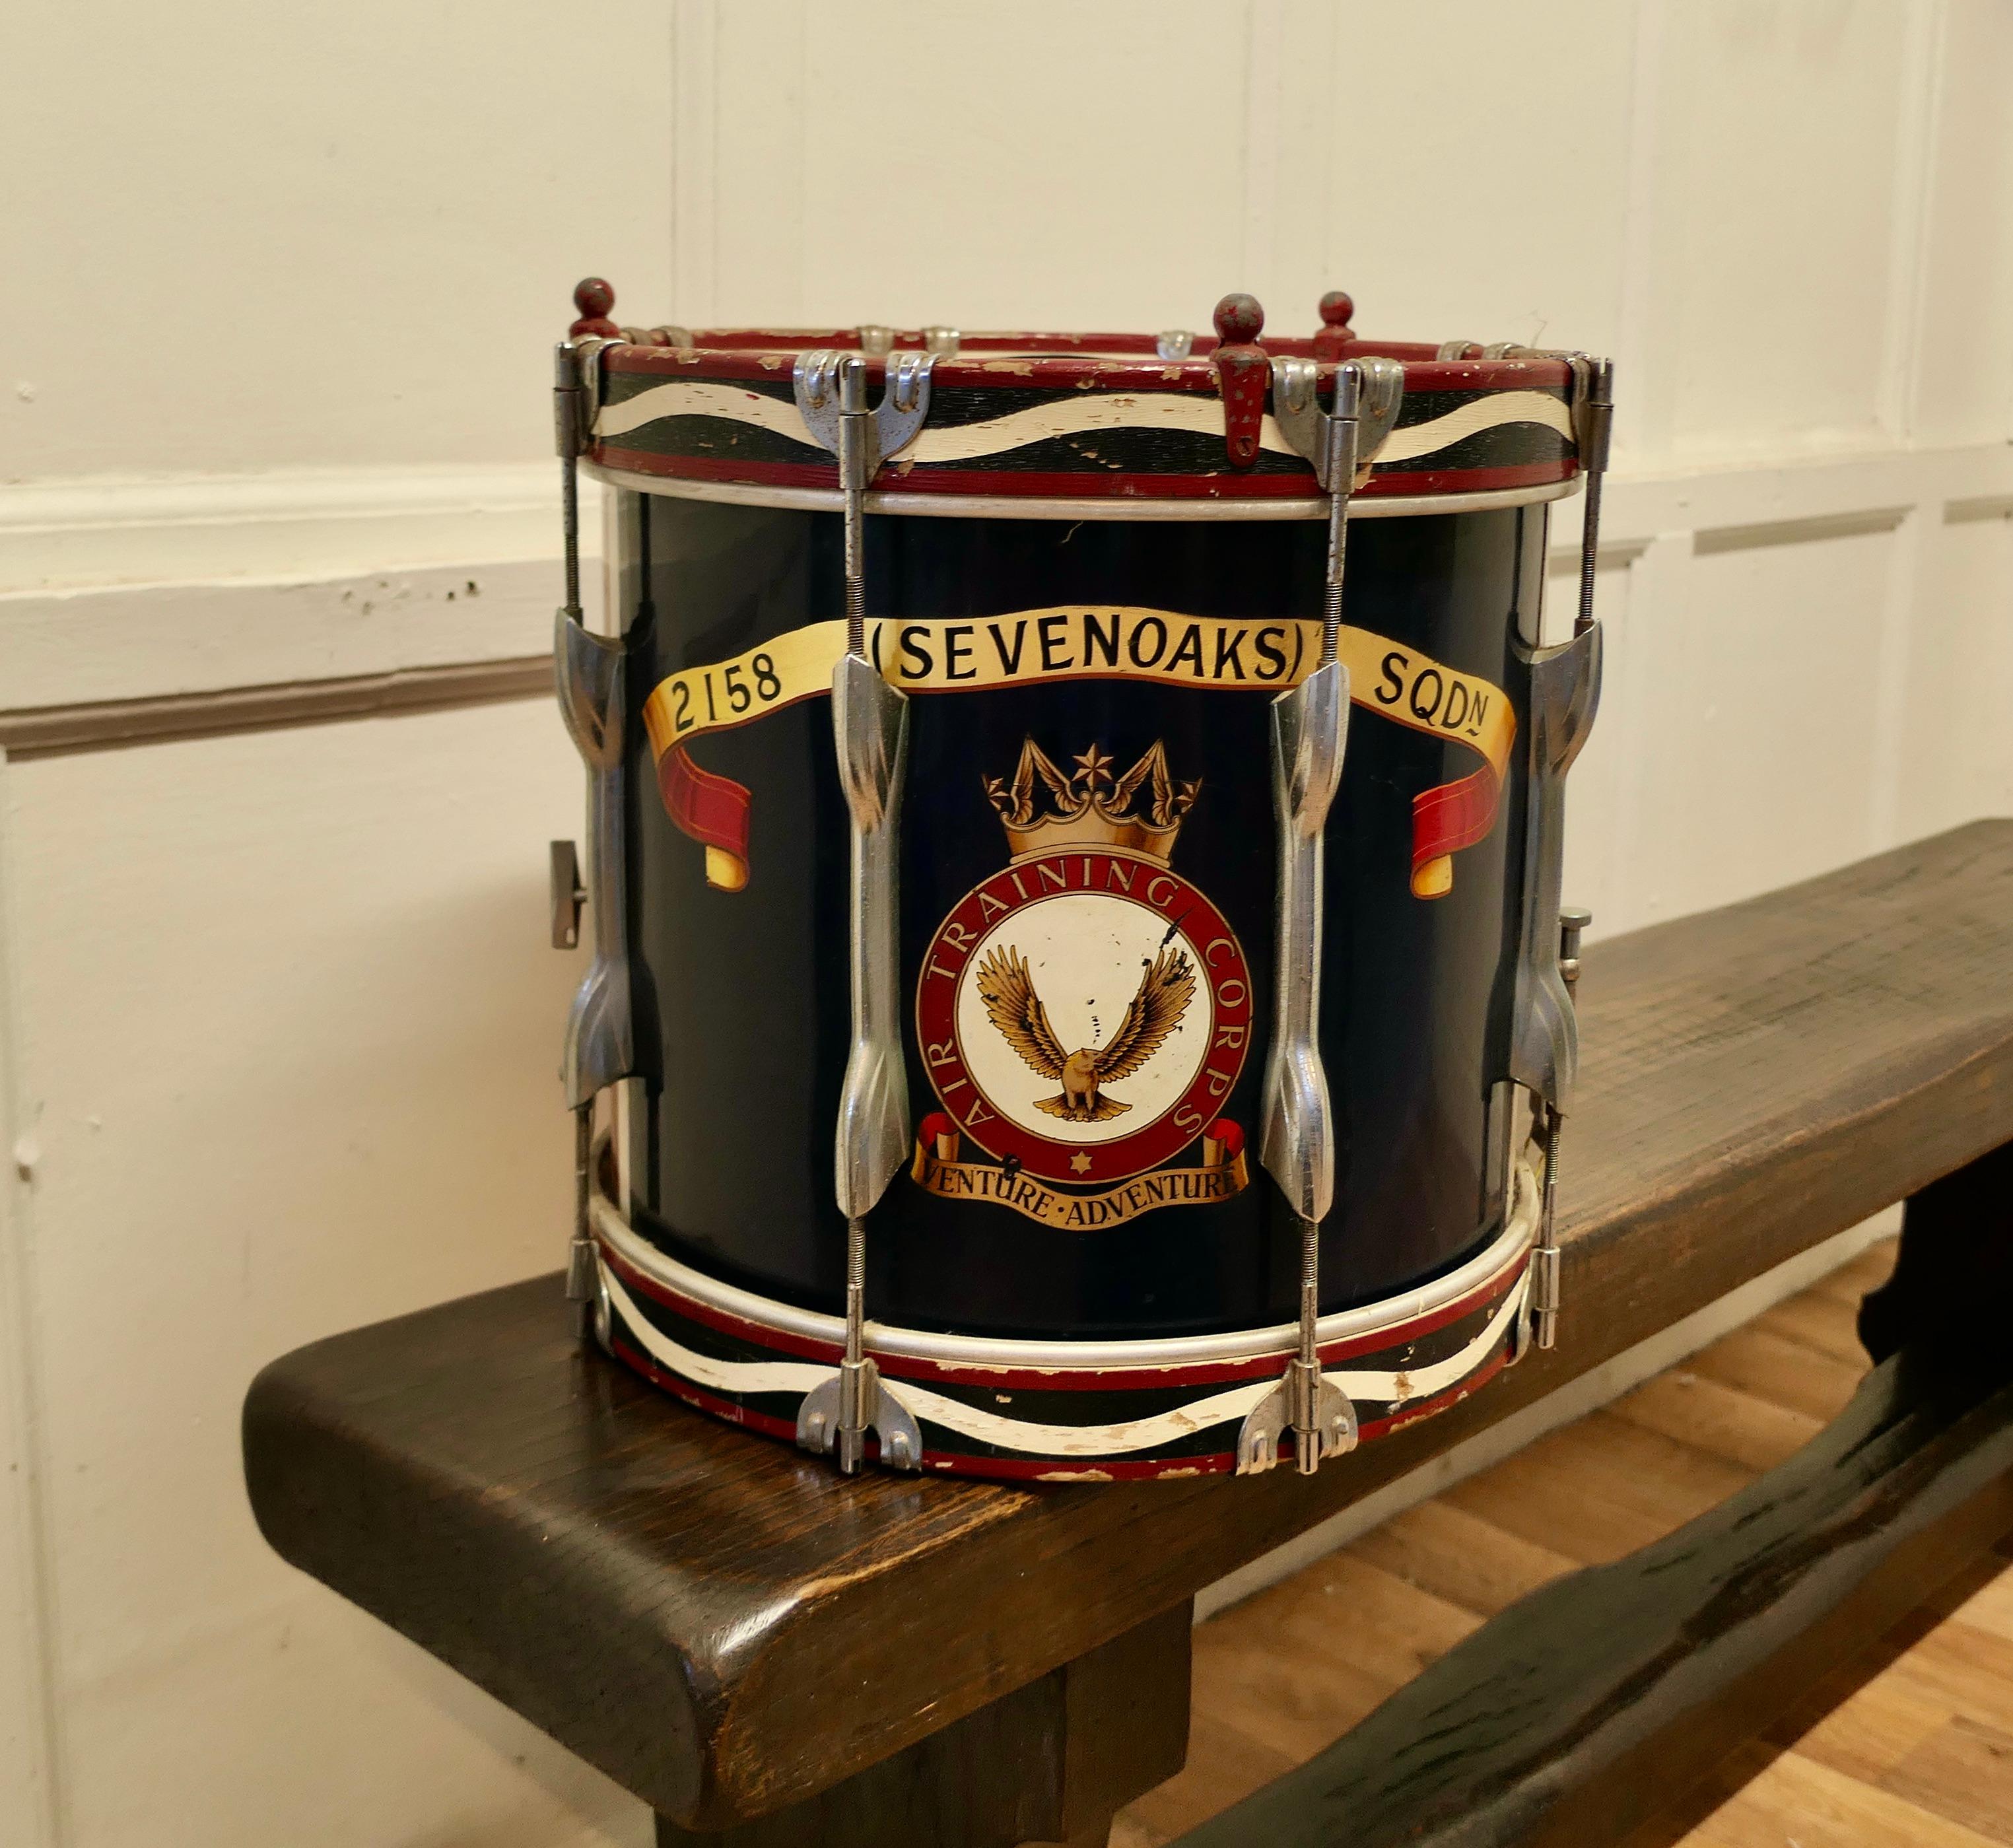 Handsome military snare drum from sevenoaks air training corps.


This a good decorative piece ‘2158 SEVENOAKS SQDn’ AIR TRAINING CORPS’ painted on the front, Gold and Red on a Navy background
Drums like this make excellent decorative pieces,